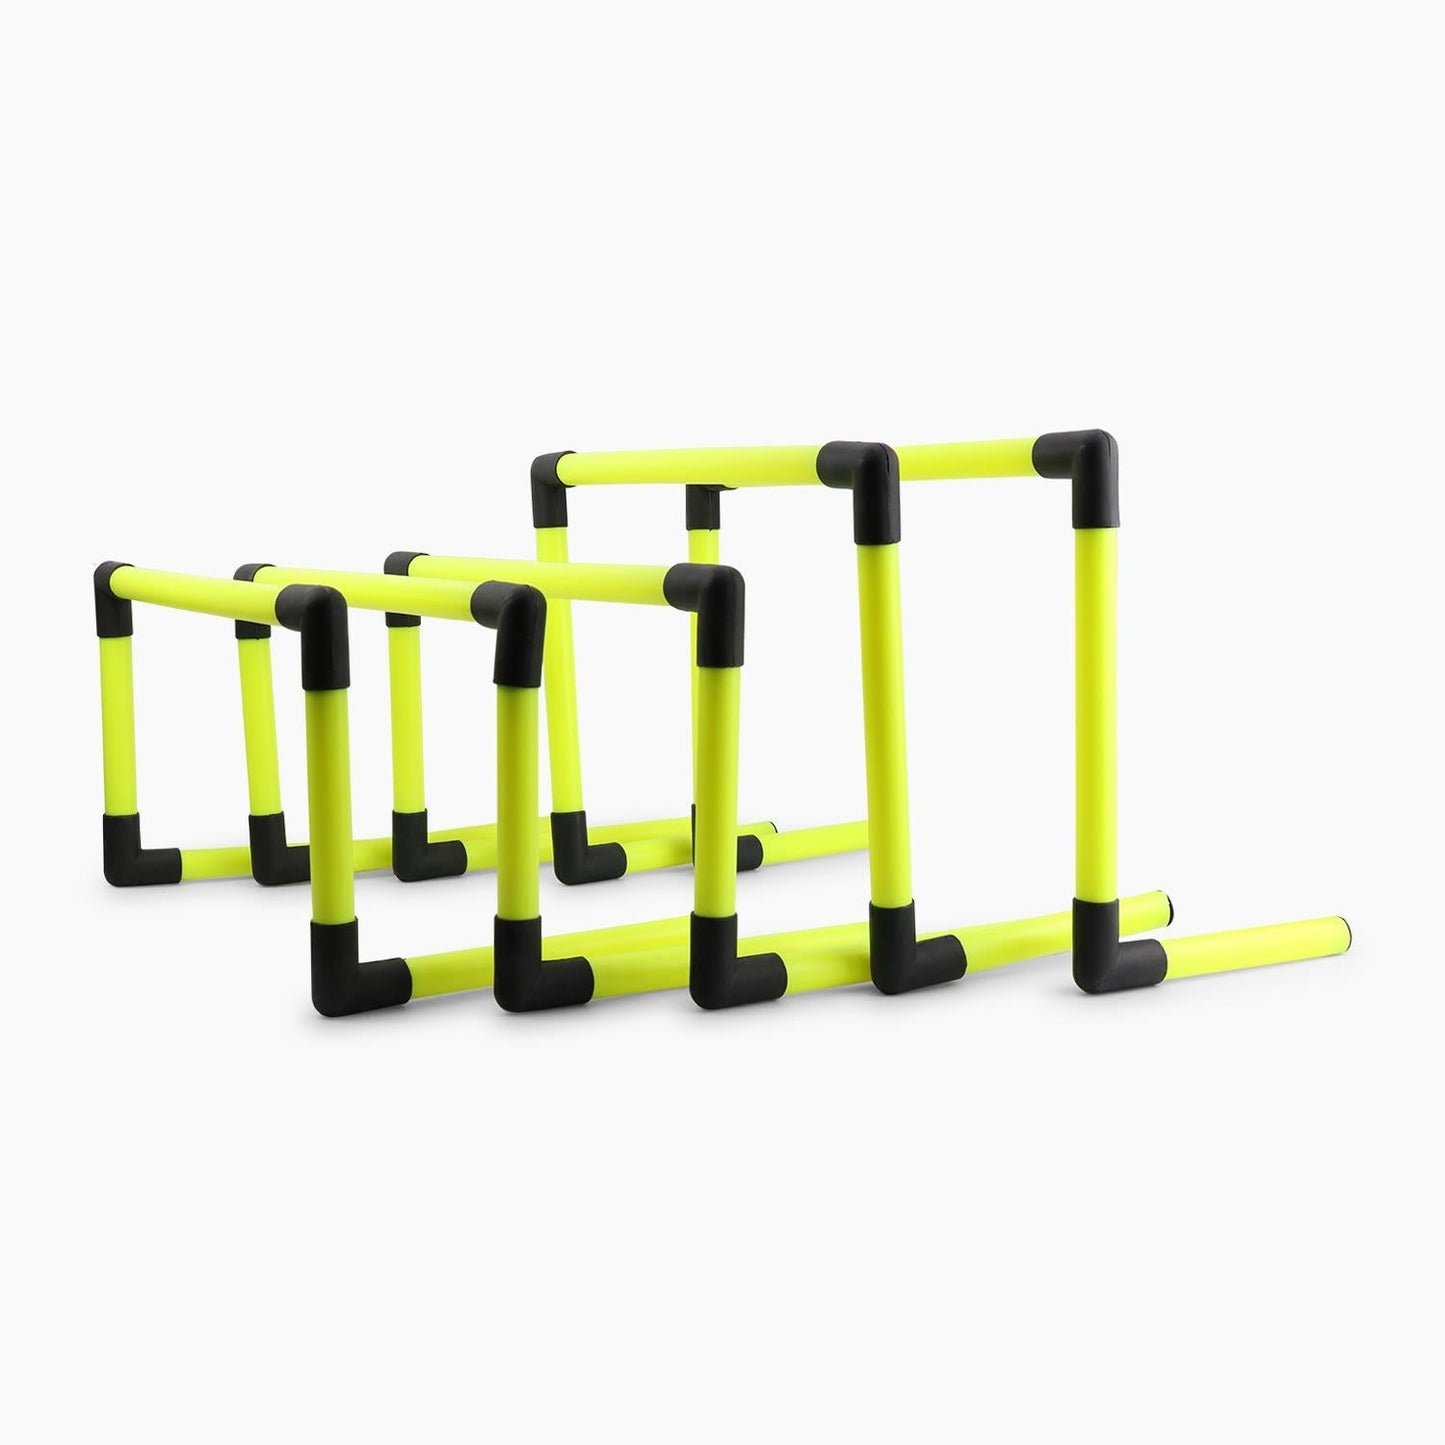 SPLAY SPORTS Adjustable / Yellow Agility hurdle portable Pole (Pack of 5)